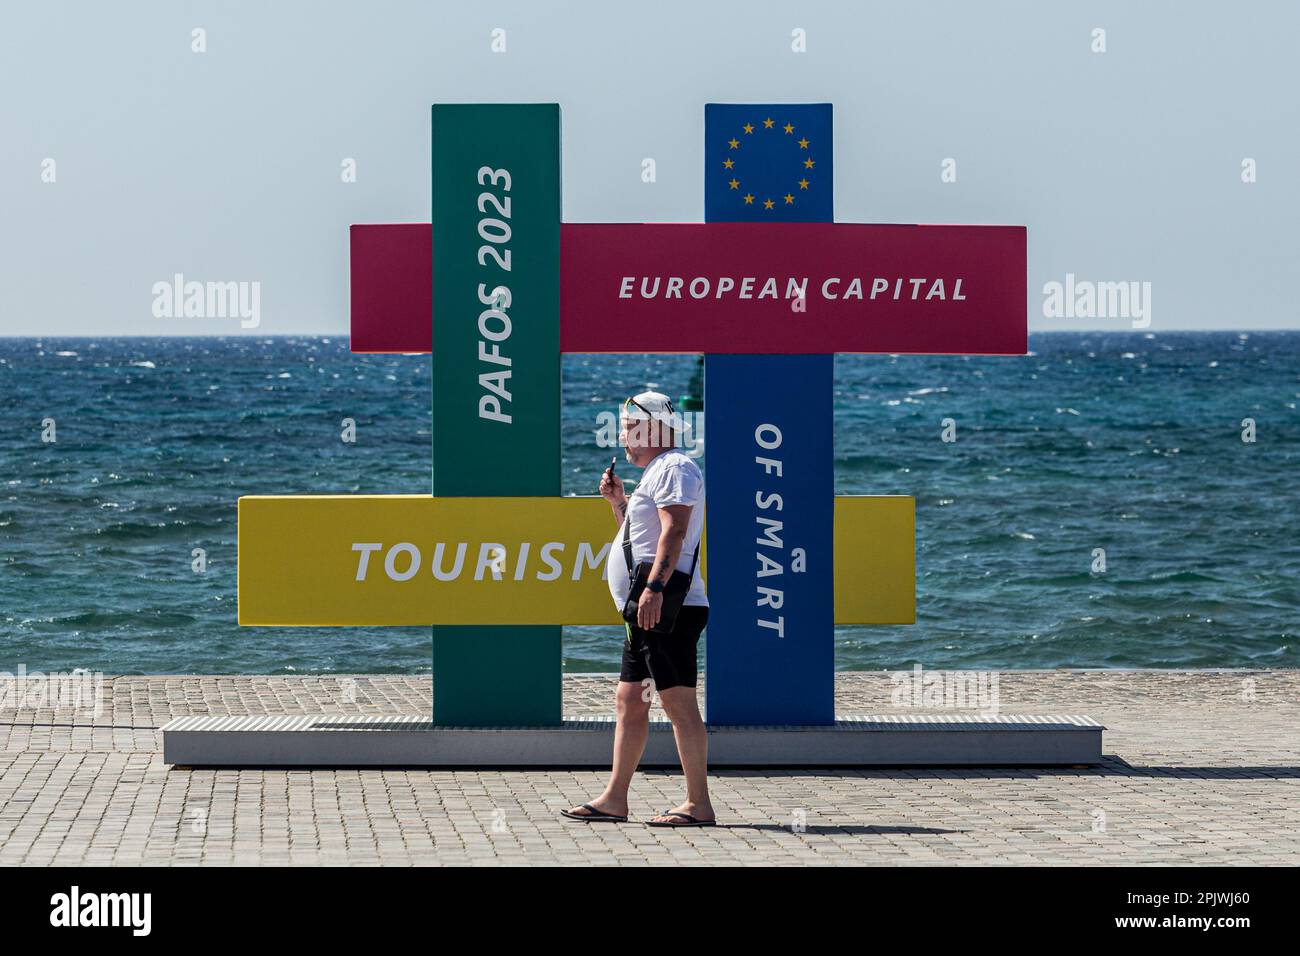 April 4, 2023, Paphos, Paphos, Cyprus: A tourist walks in front of an installation about Paphos smart tourism project. Cyprus sees massive increase in tourist arrivals in February with UK topping the list. Tourist arrivals in Cyprus increased by 65.6% year-on-year in February 2023. This fact, combined with the facts that Cyprus welcomed 3.2 million tourists last year, despite the absence of 800,000 Russian and Ukrainian tourists because of the war and that for 2022 it is estimated that tourists' spending has increased by about 13% on average for each trip, makes 2023 seem very promising. (Cred Stock Photo